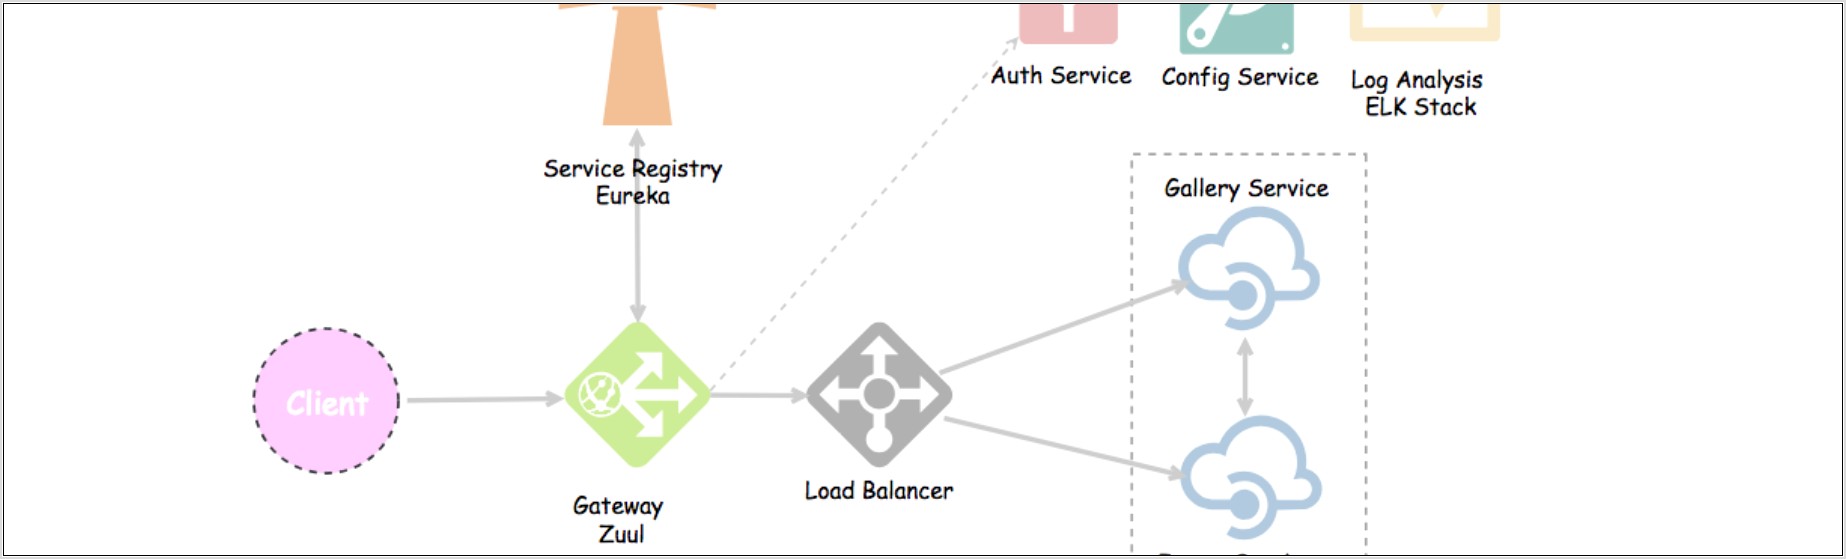 Spring Boot Microservices Architecture Diagram